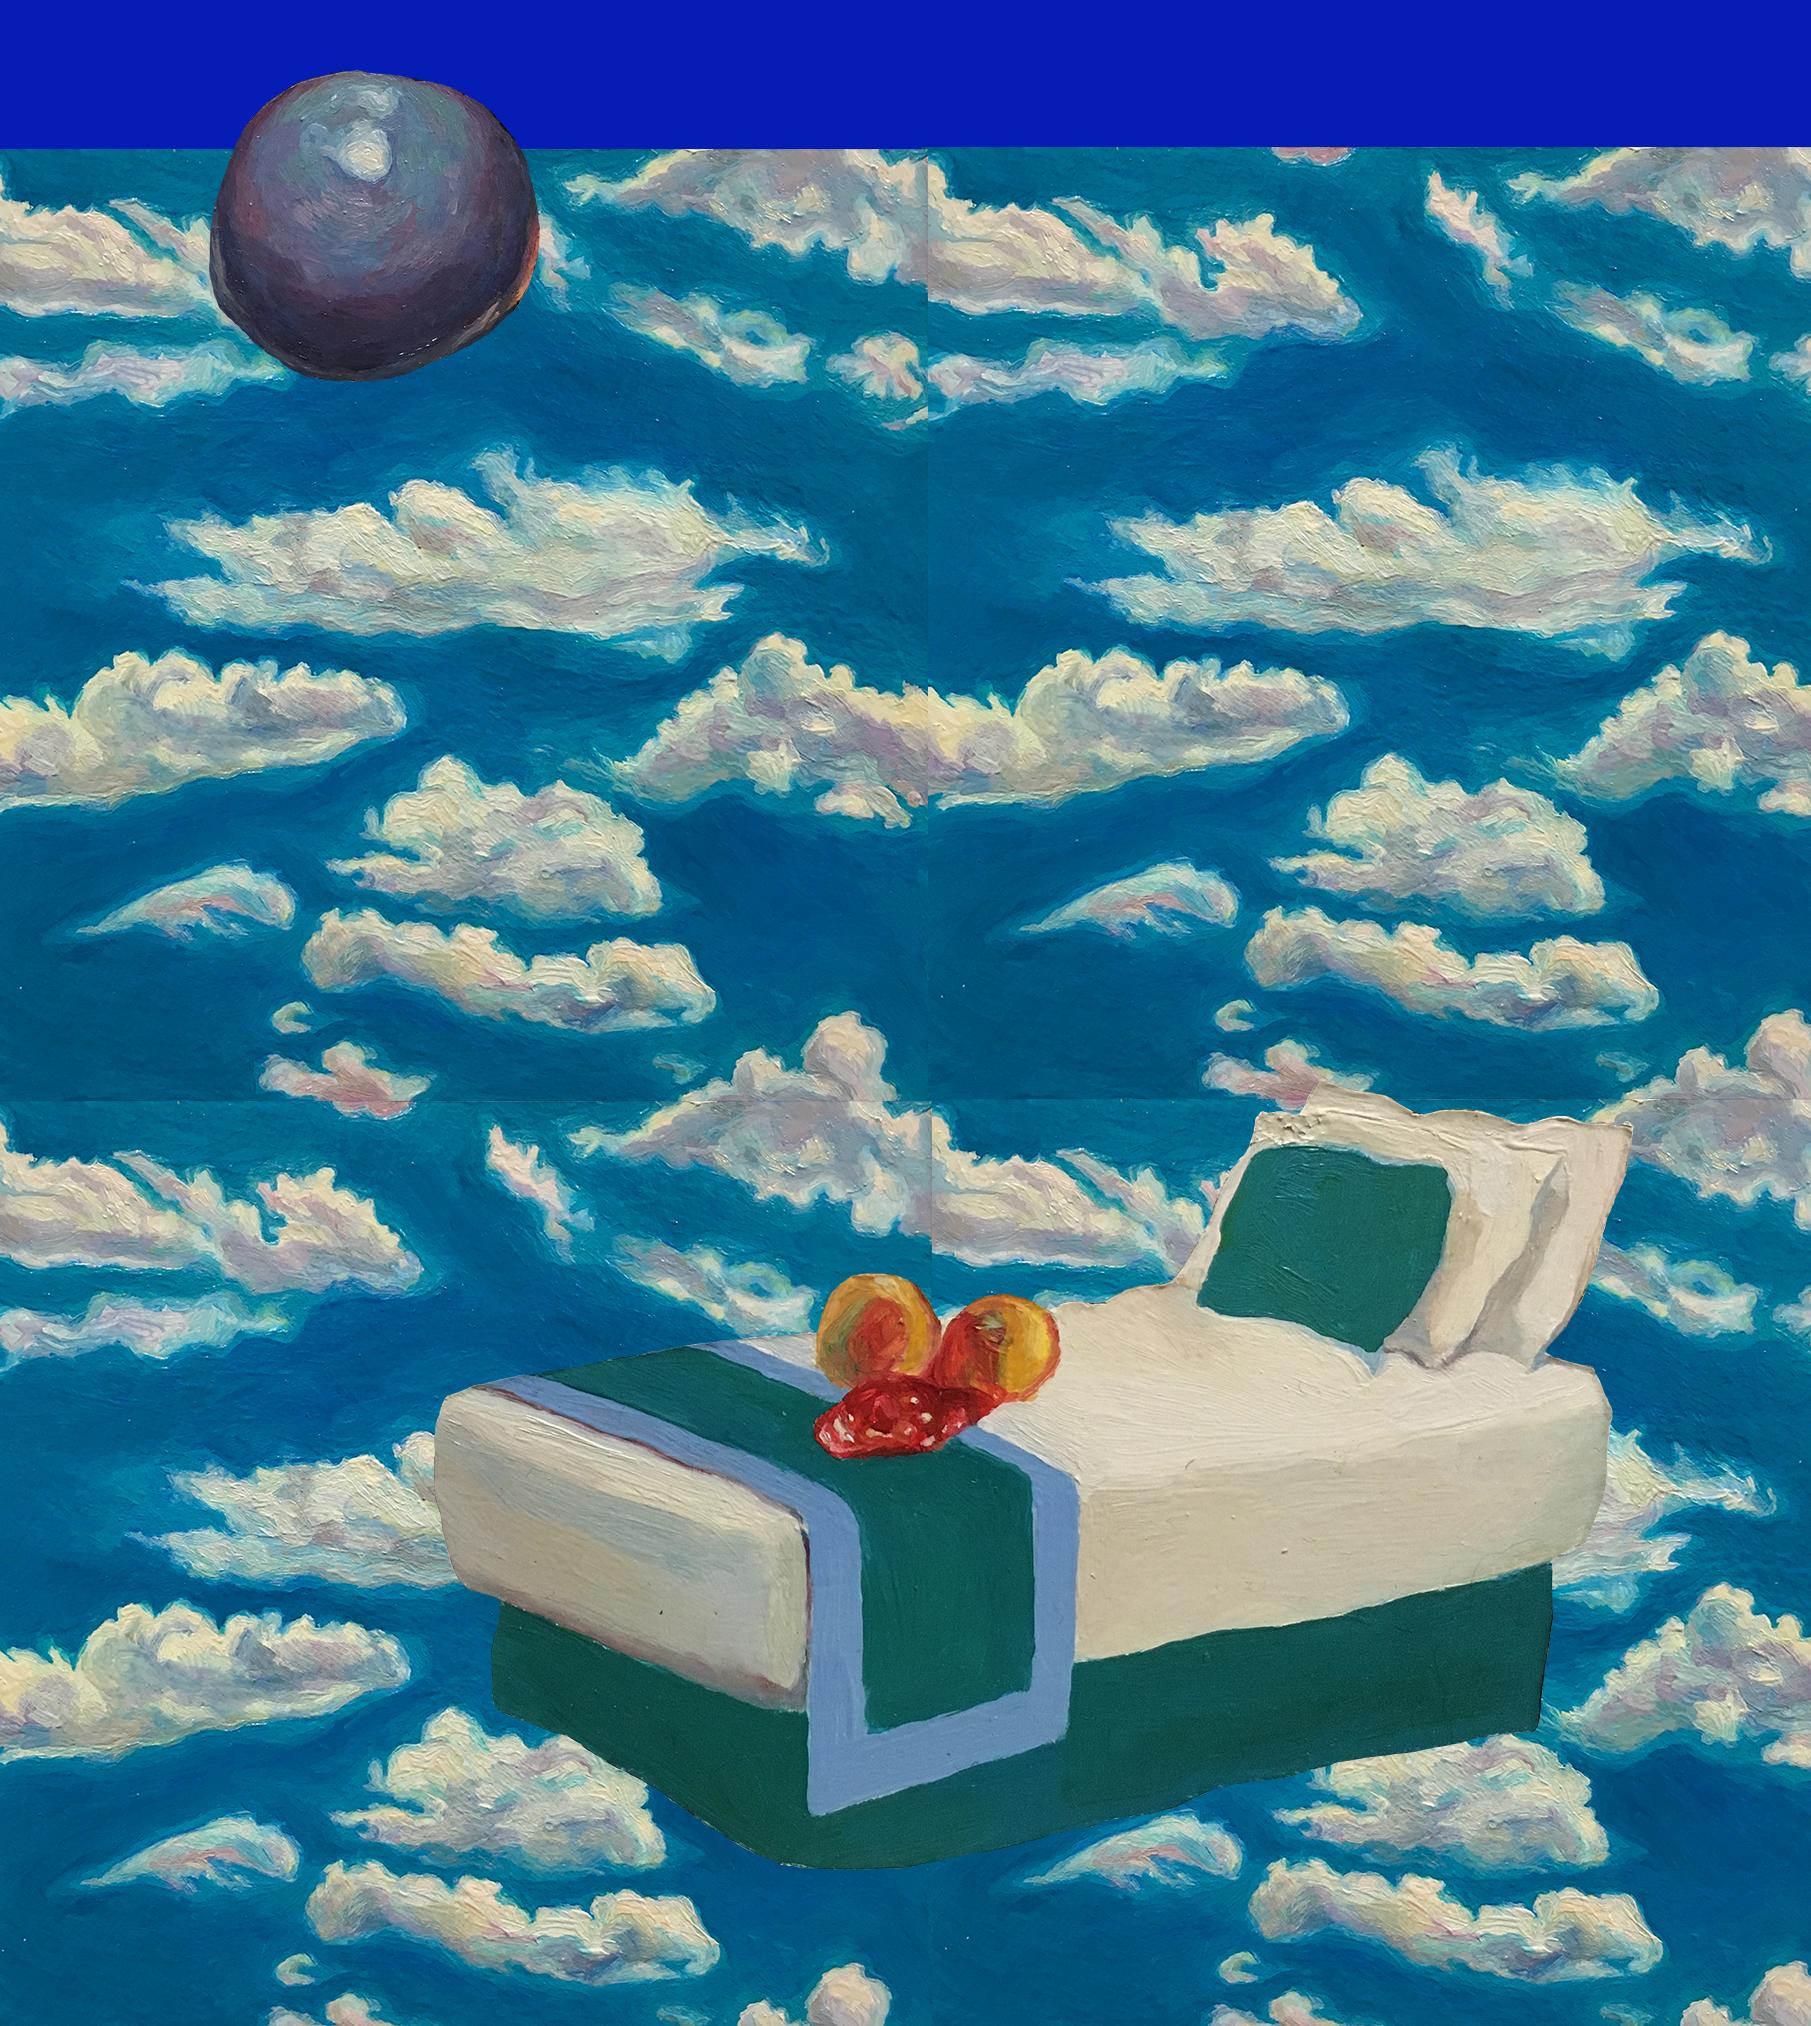 A photographic collage of oil paintings, including a blue orb and a neatly made hotel bed with two medium-dark orange spheres and a red puddle on it, floating in front of a medium-dark blue sky with little white clouds.